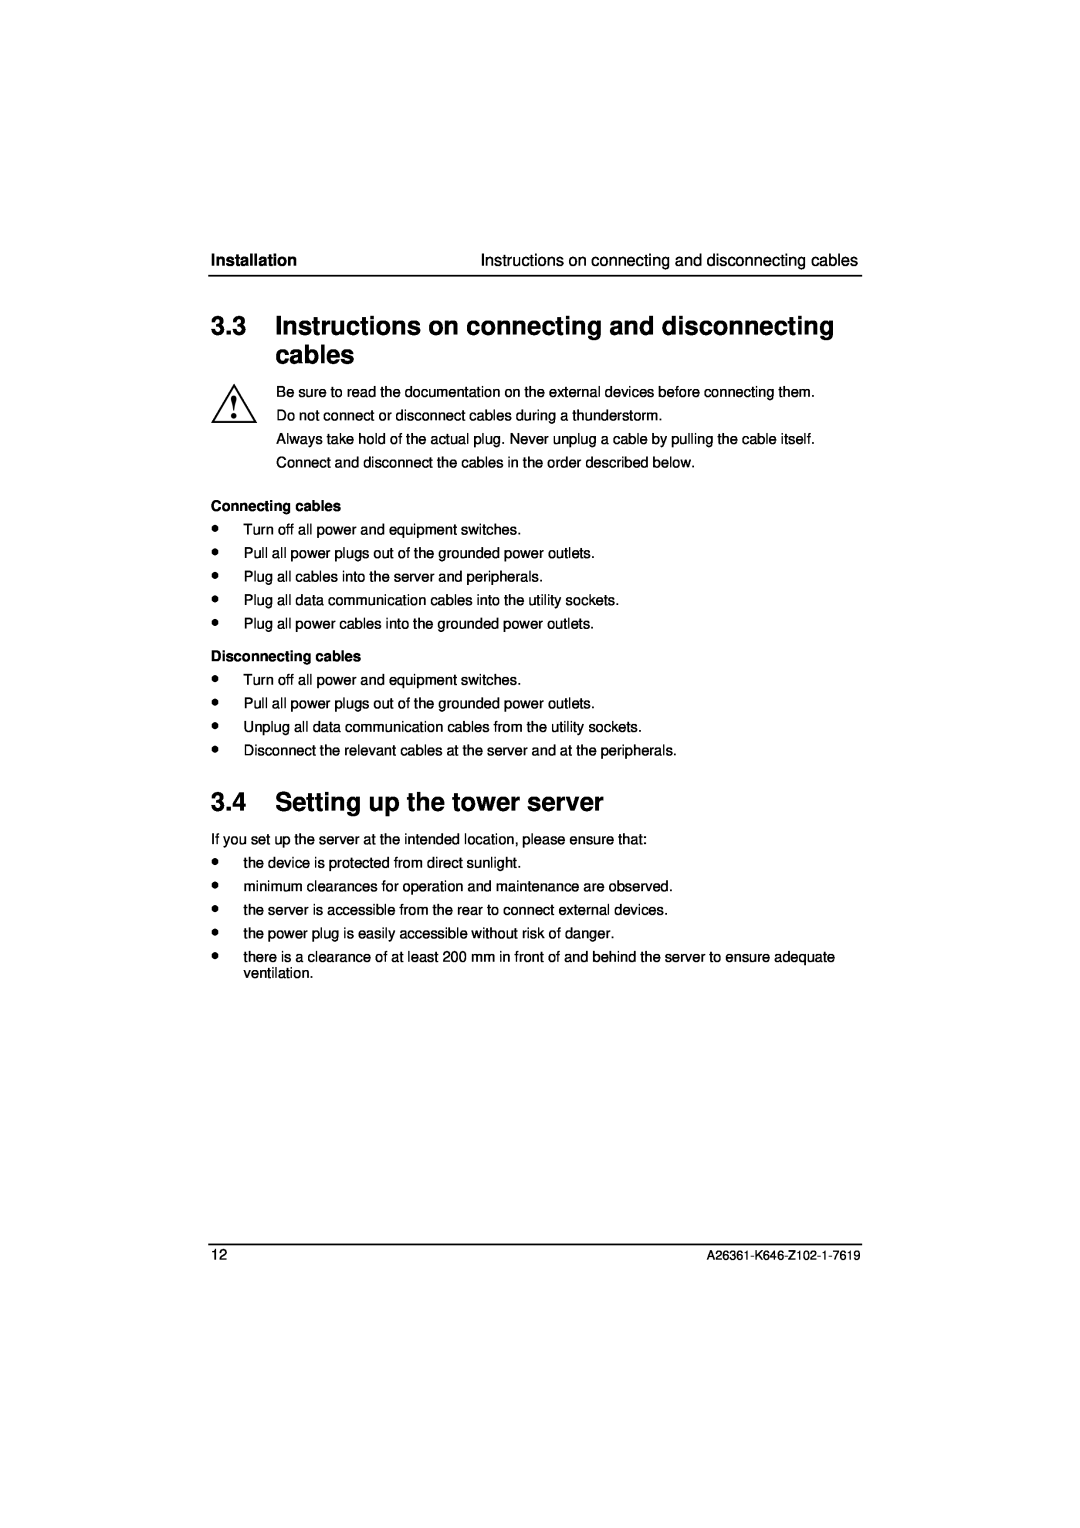 Fujitsu B120 manual Instructions on connecting and disconnecting cables, Setting up the tower server, Installation 